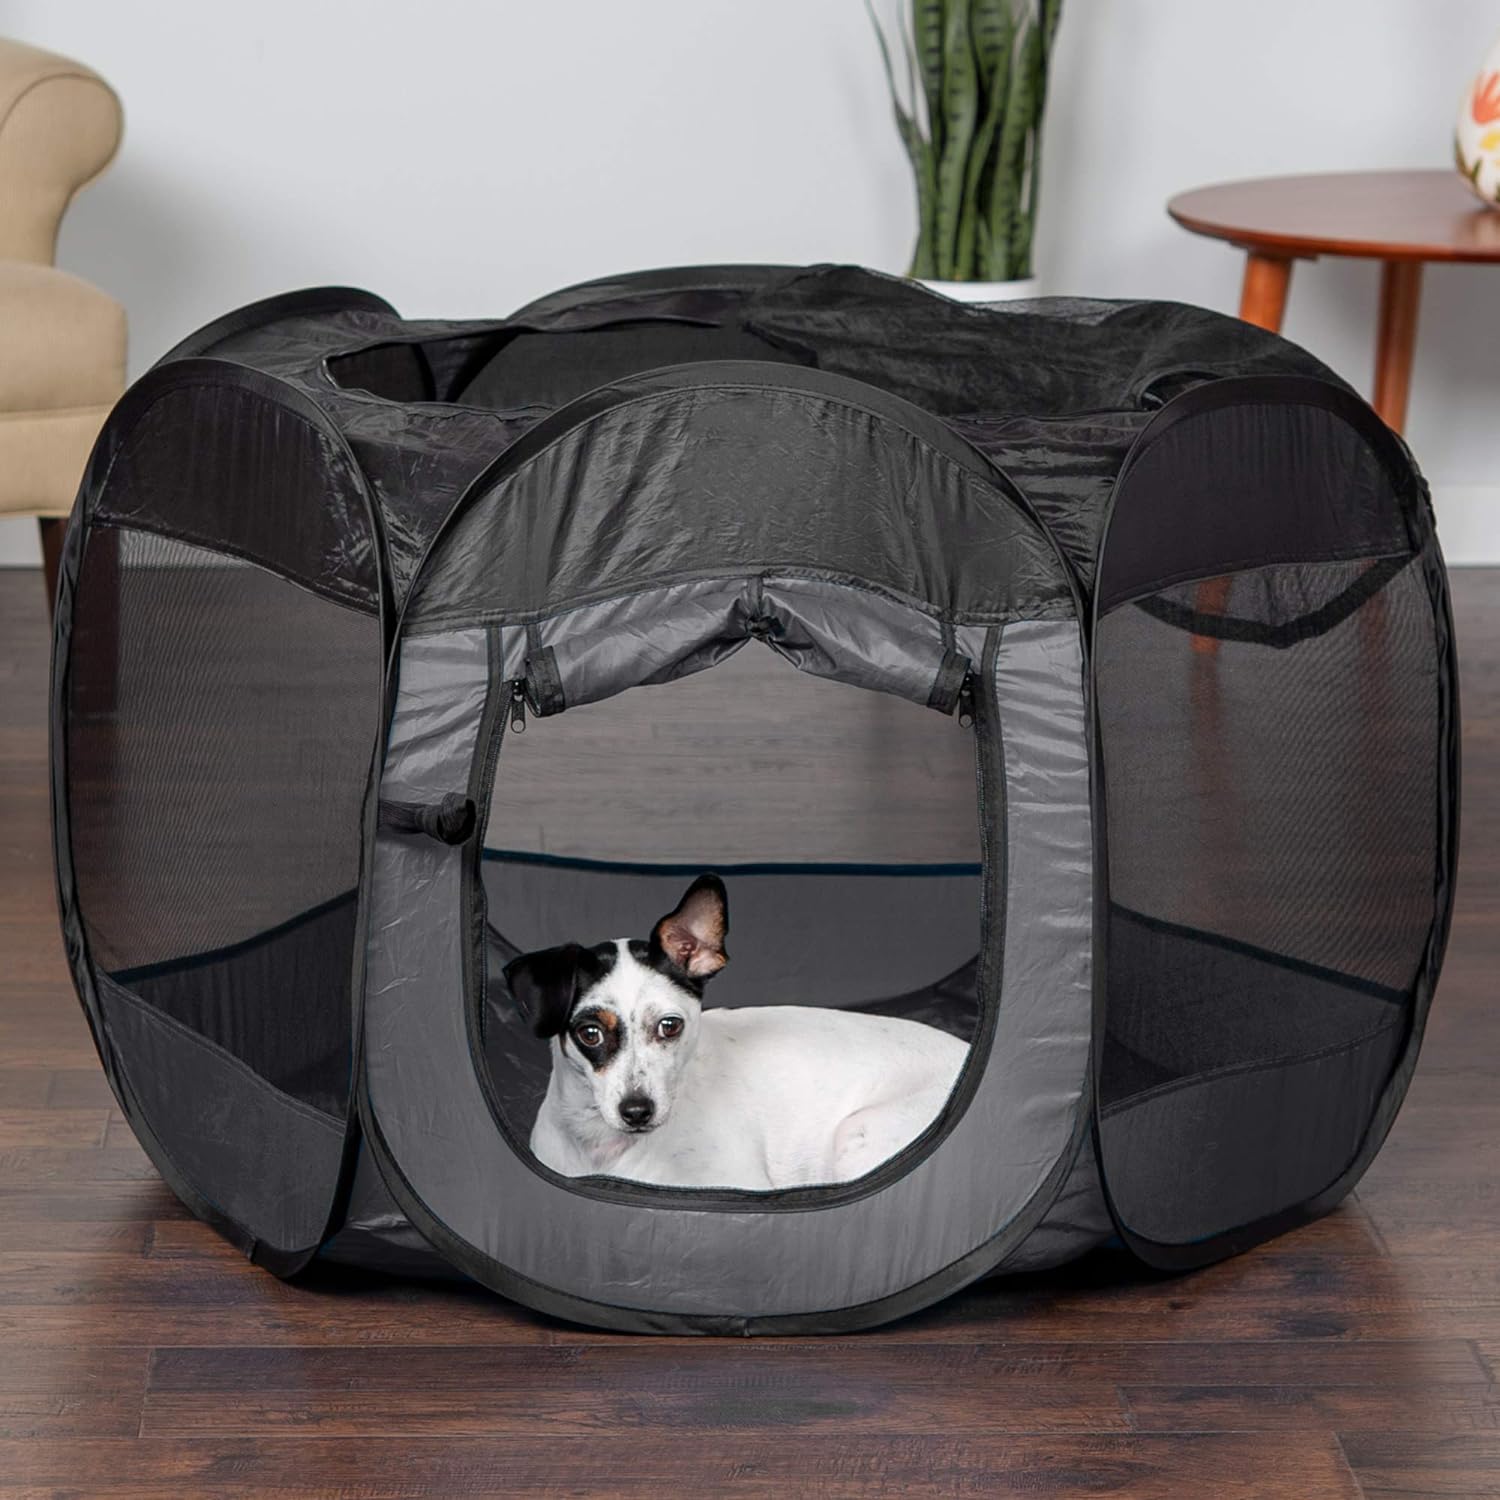 Furhaven Pop Up Playpen Pet Tent Playground - Gray, Small